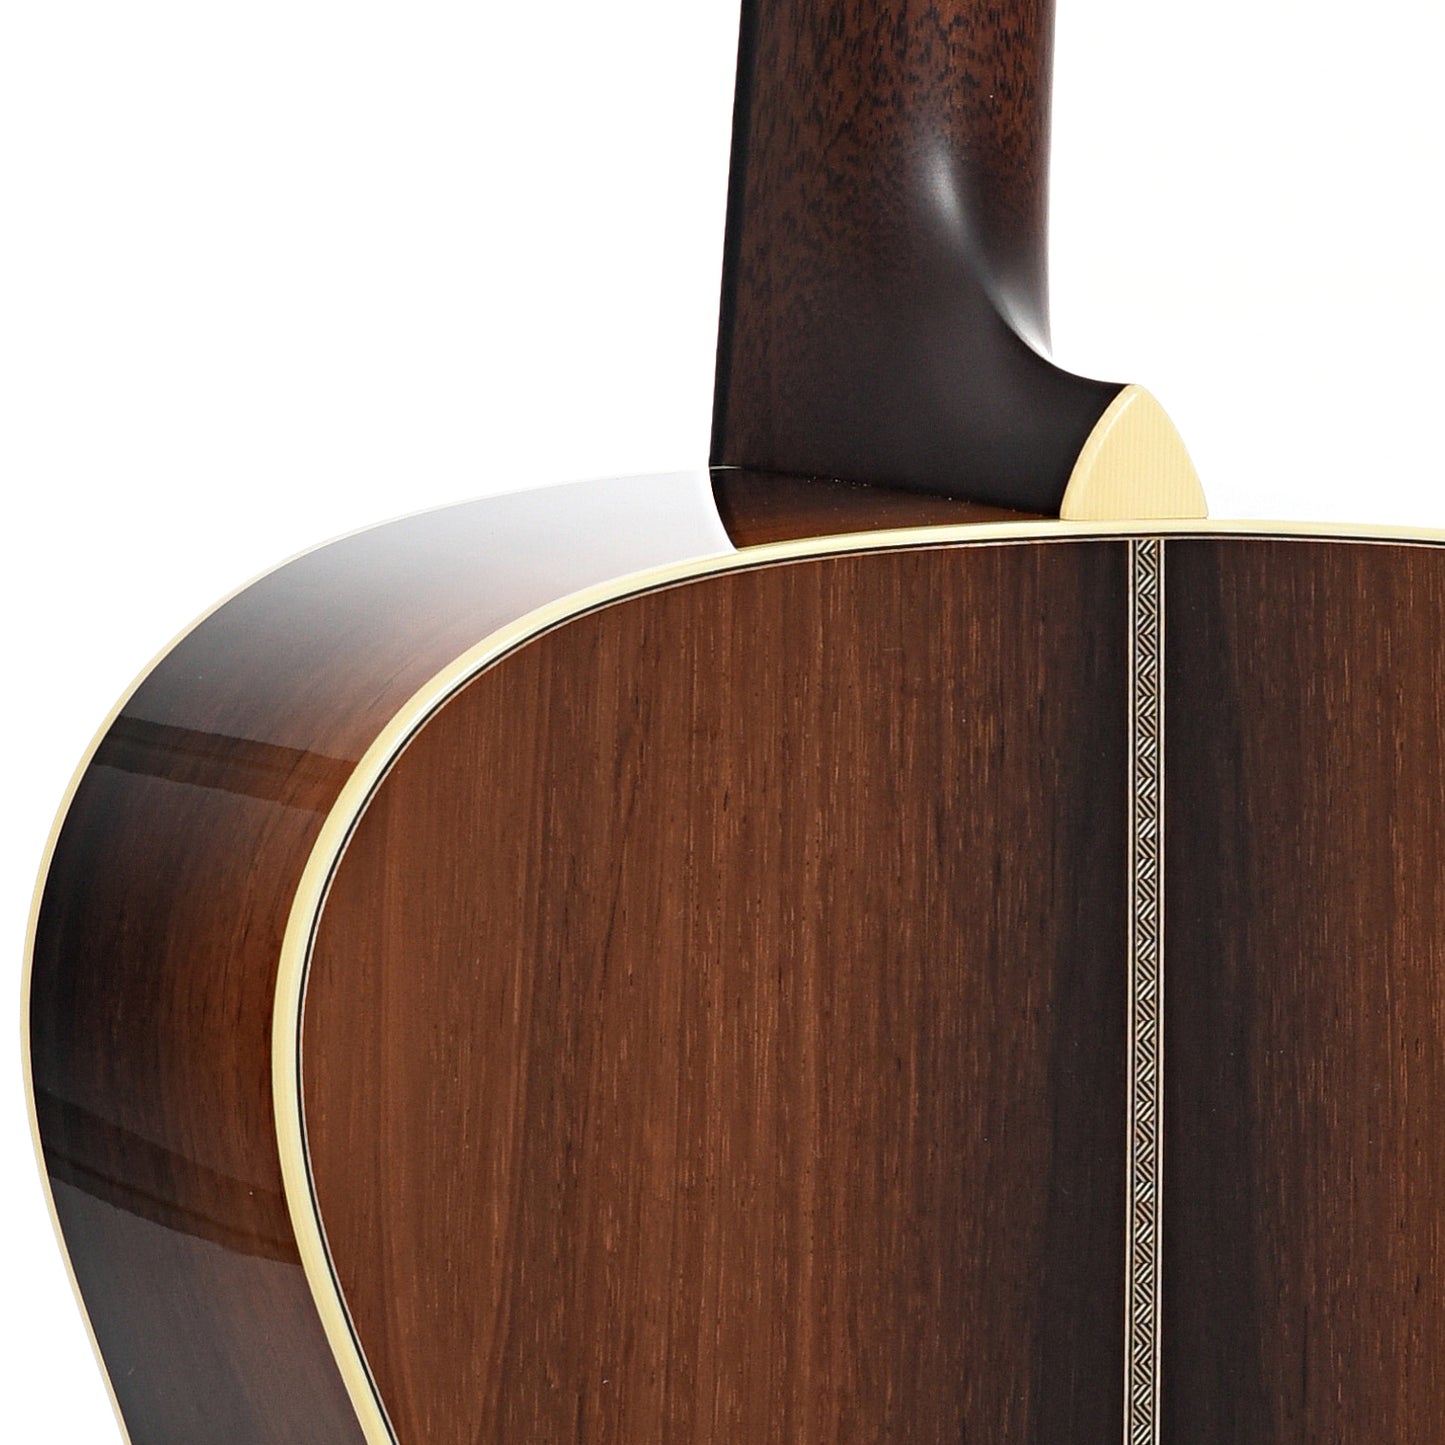 Heel of Bourgeois Limited Edition Brazilian Rosewood 000LE Acoustic Guitar